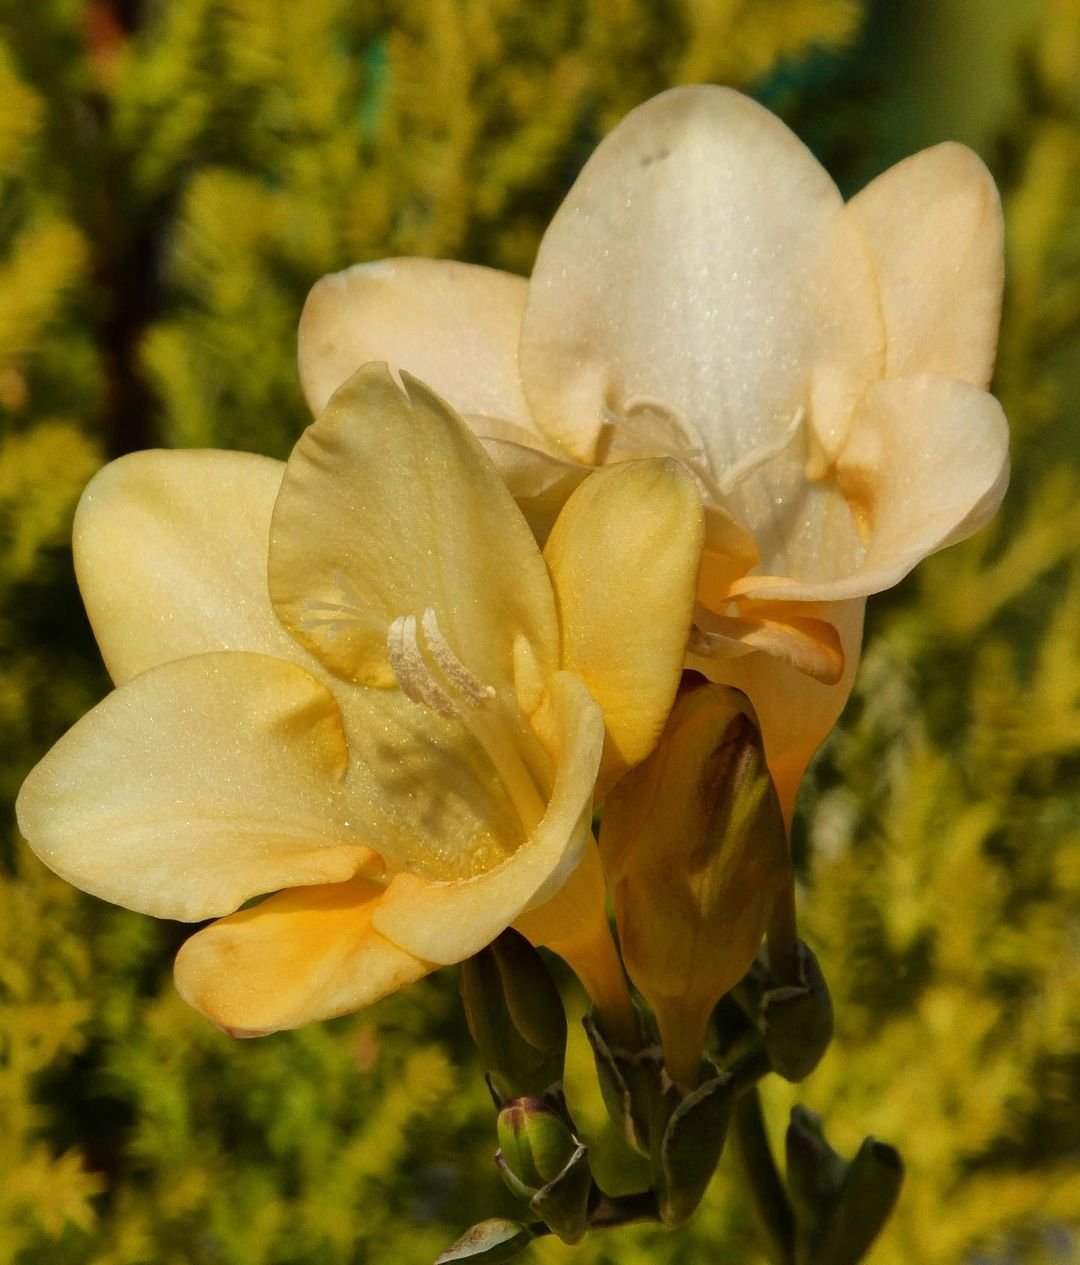  Two yellow freesia flowers surrounded by lush green leaves.